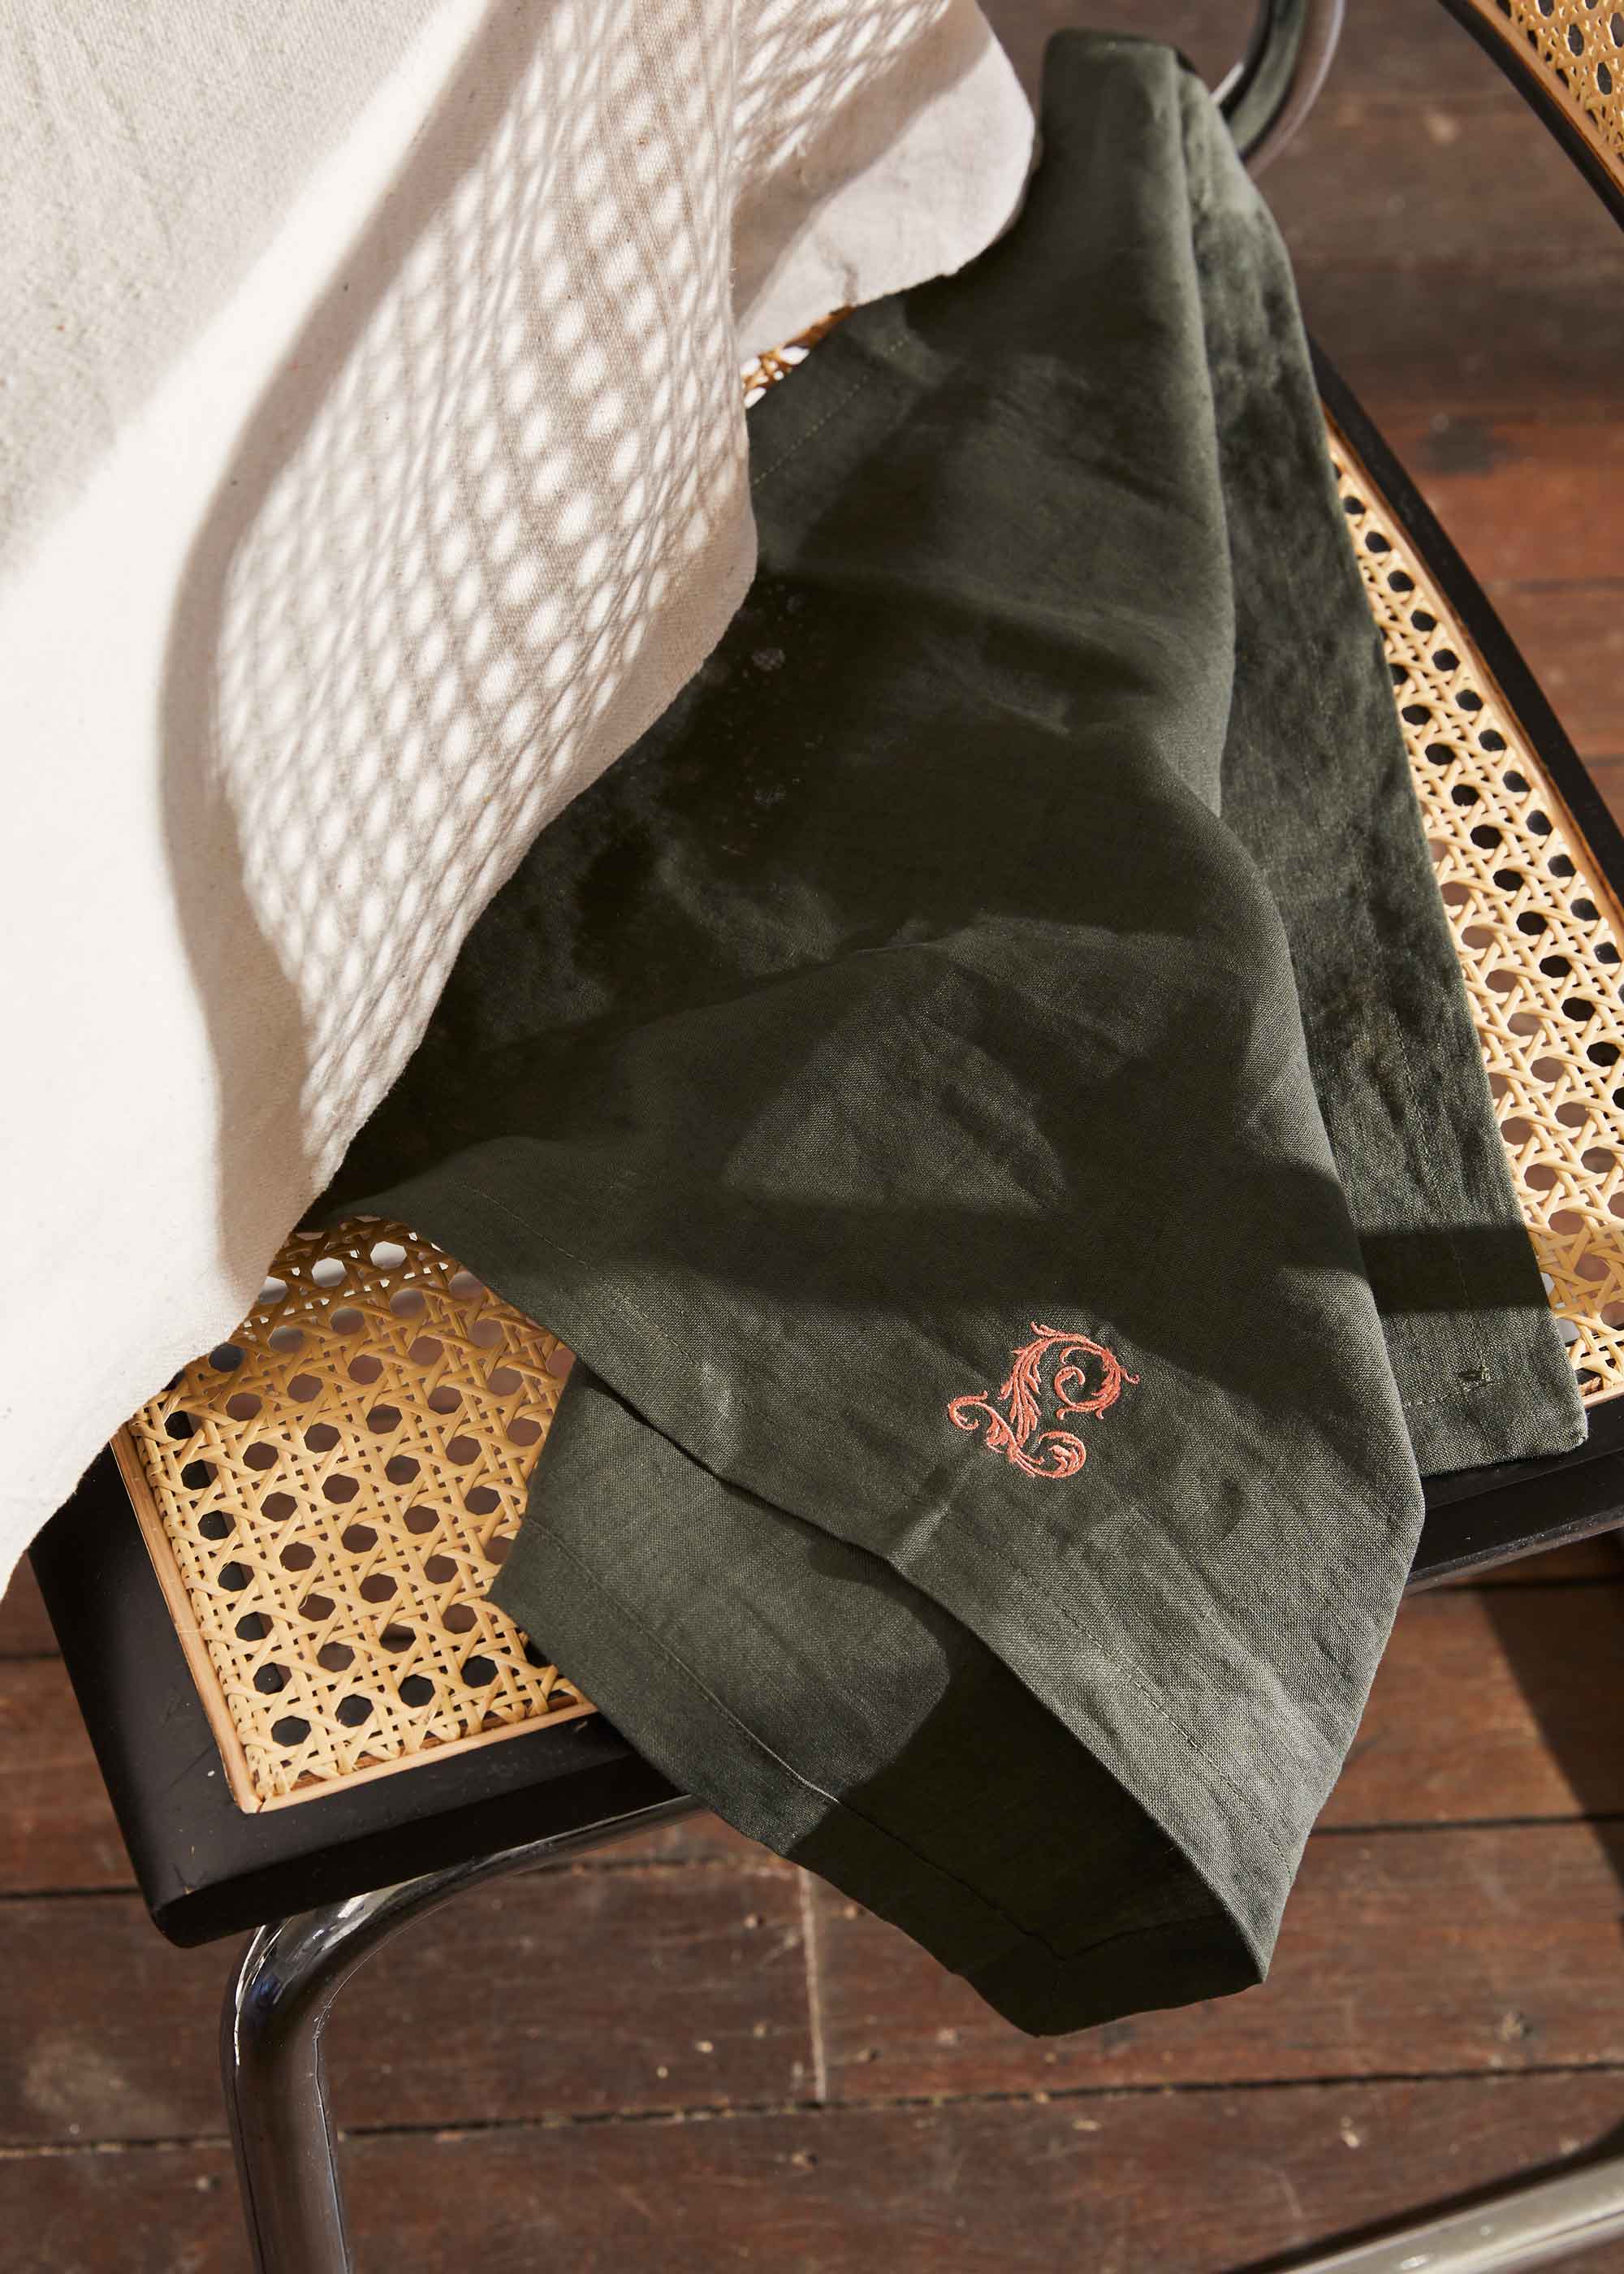 Monogrammed linen placemats and napkins